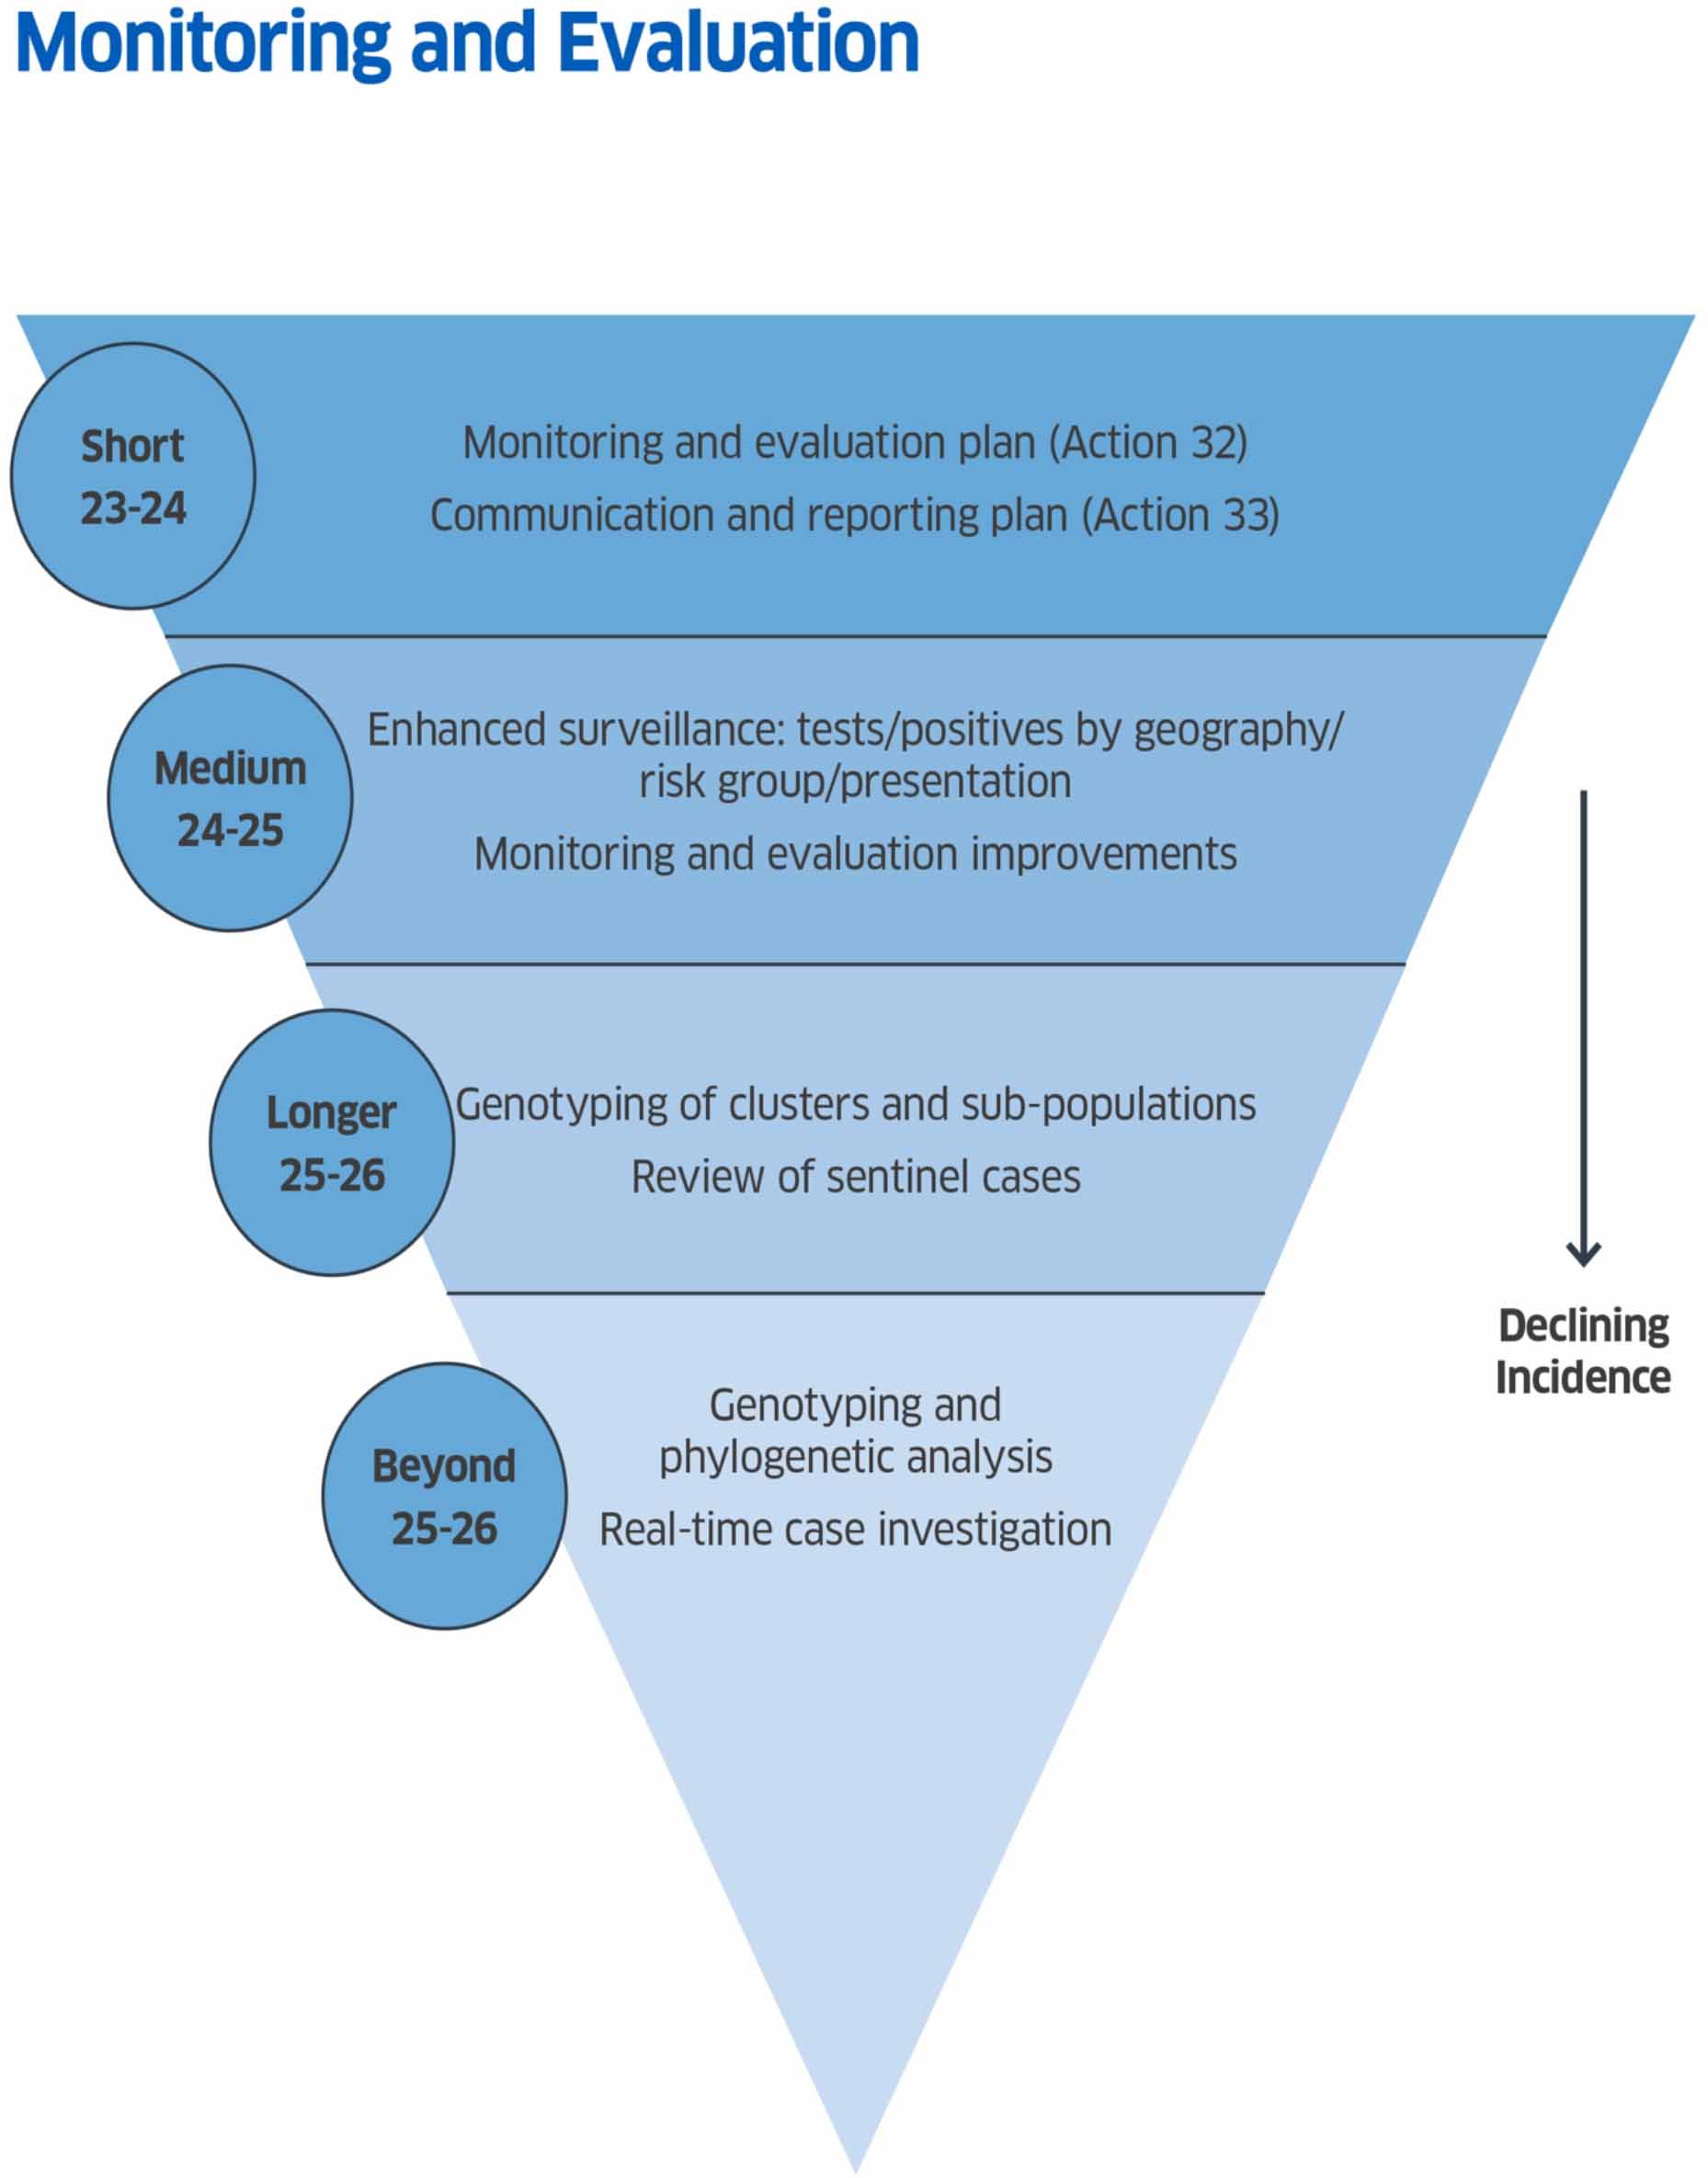 An inverted triangle showing the Monitoring and Evaluation actions for short, medium, longer and beyond 2025/26 as incidence declines